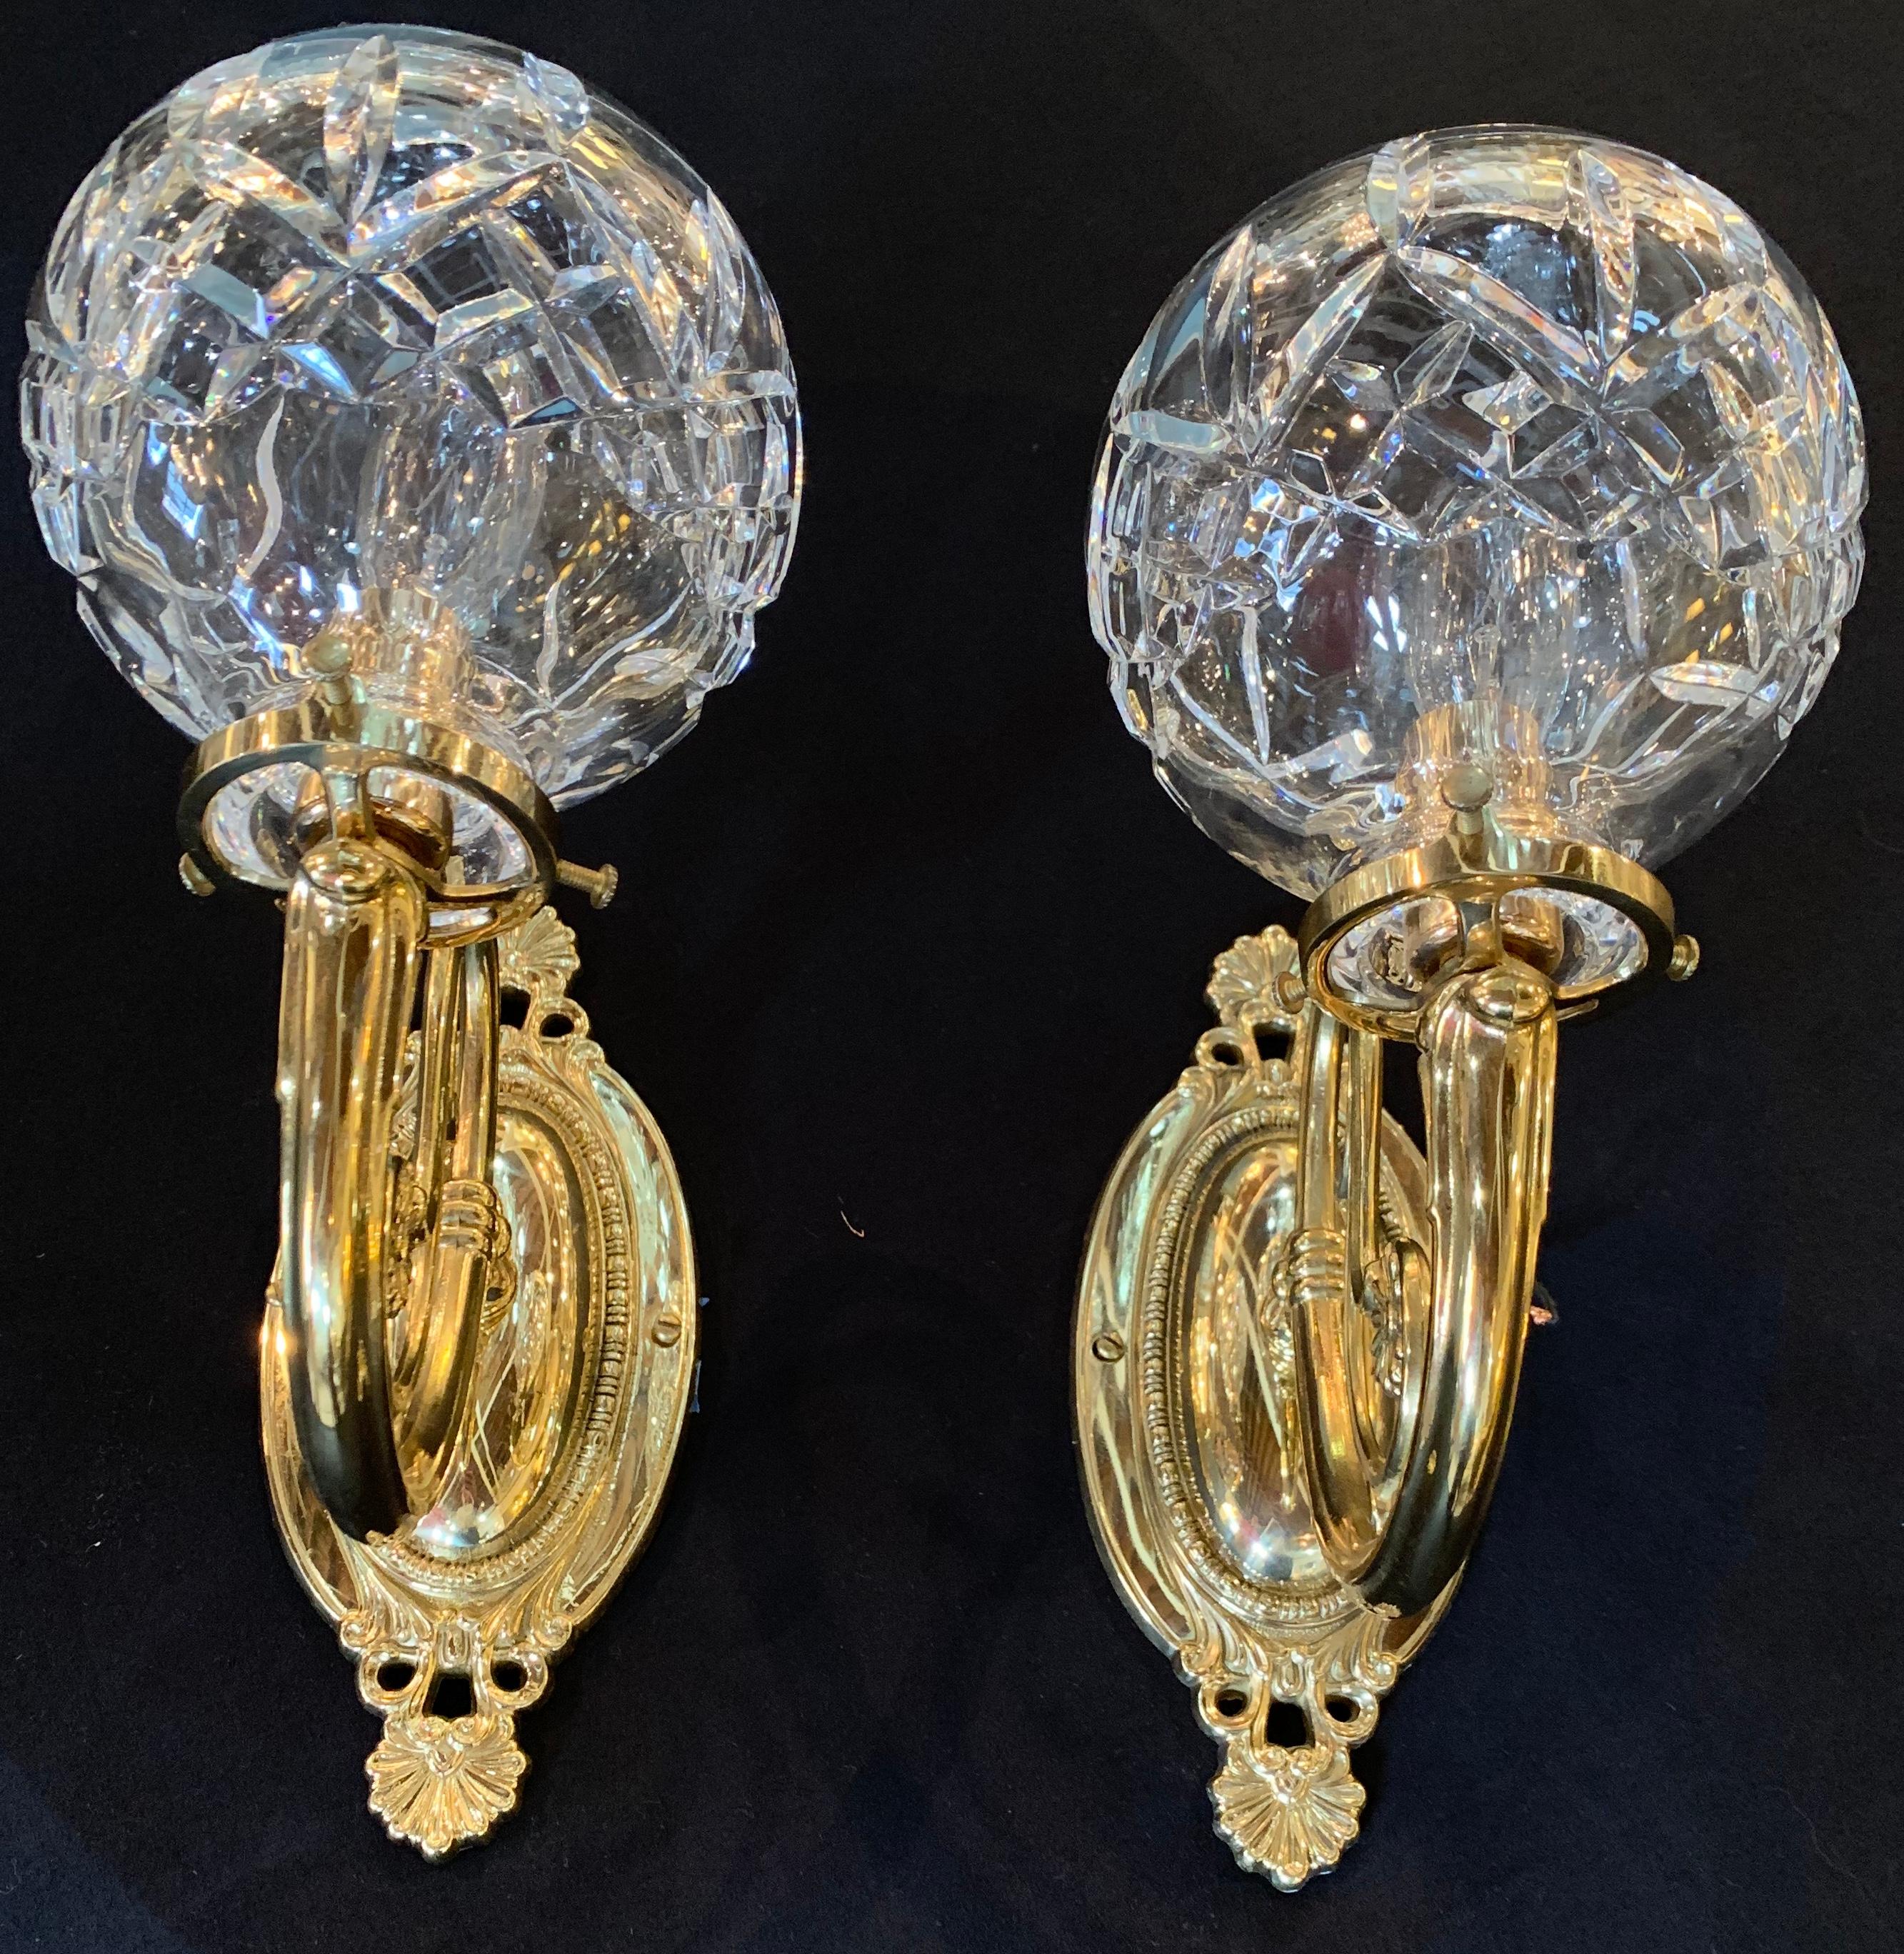 Pair of Hollywood Regency style Waterford brass and crystal single light wall sconces on brass back plates.